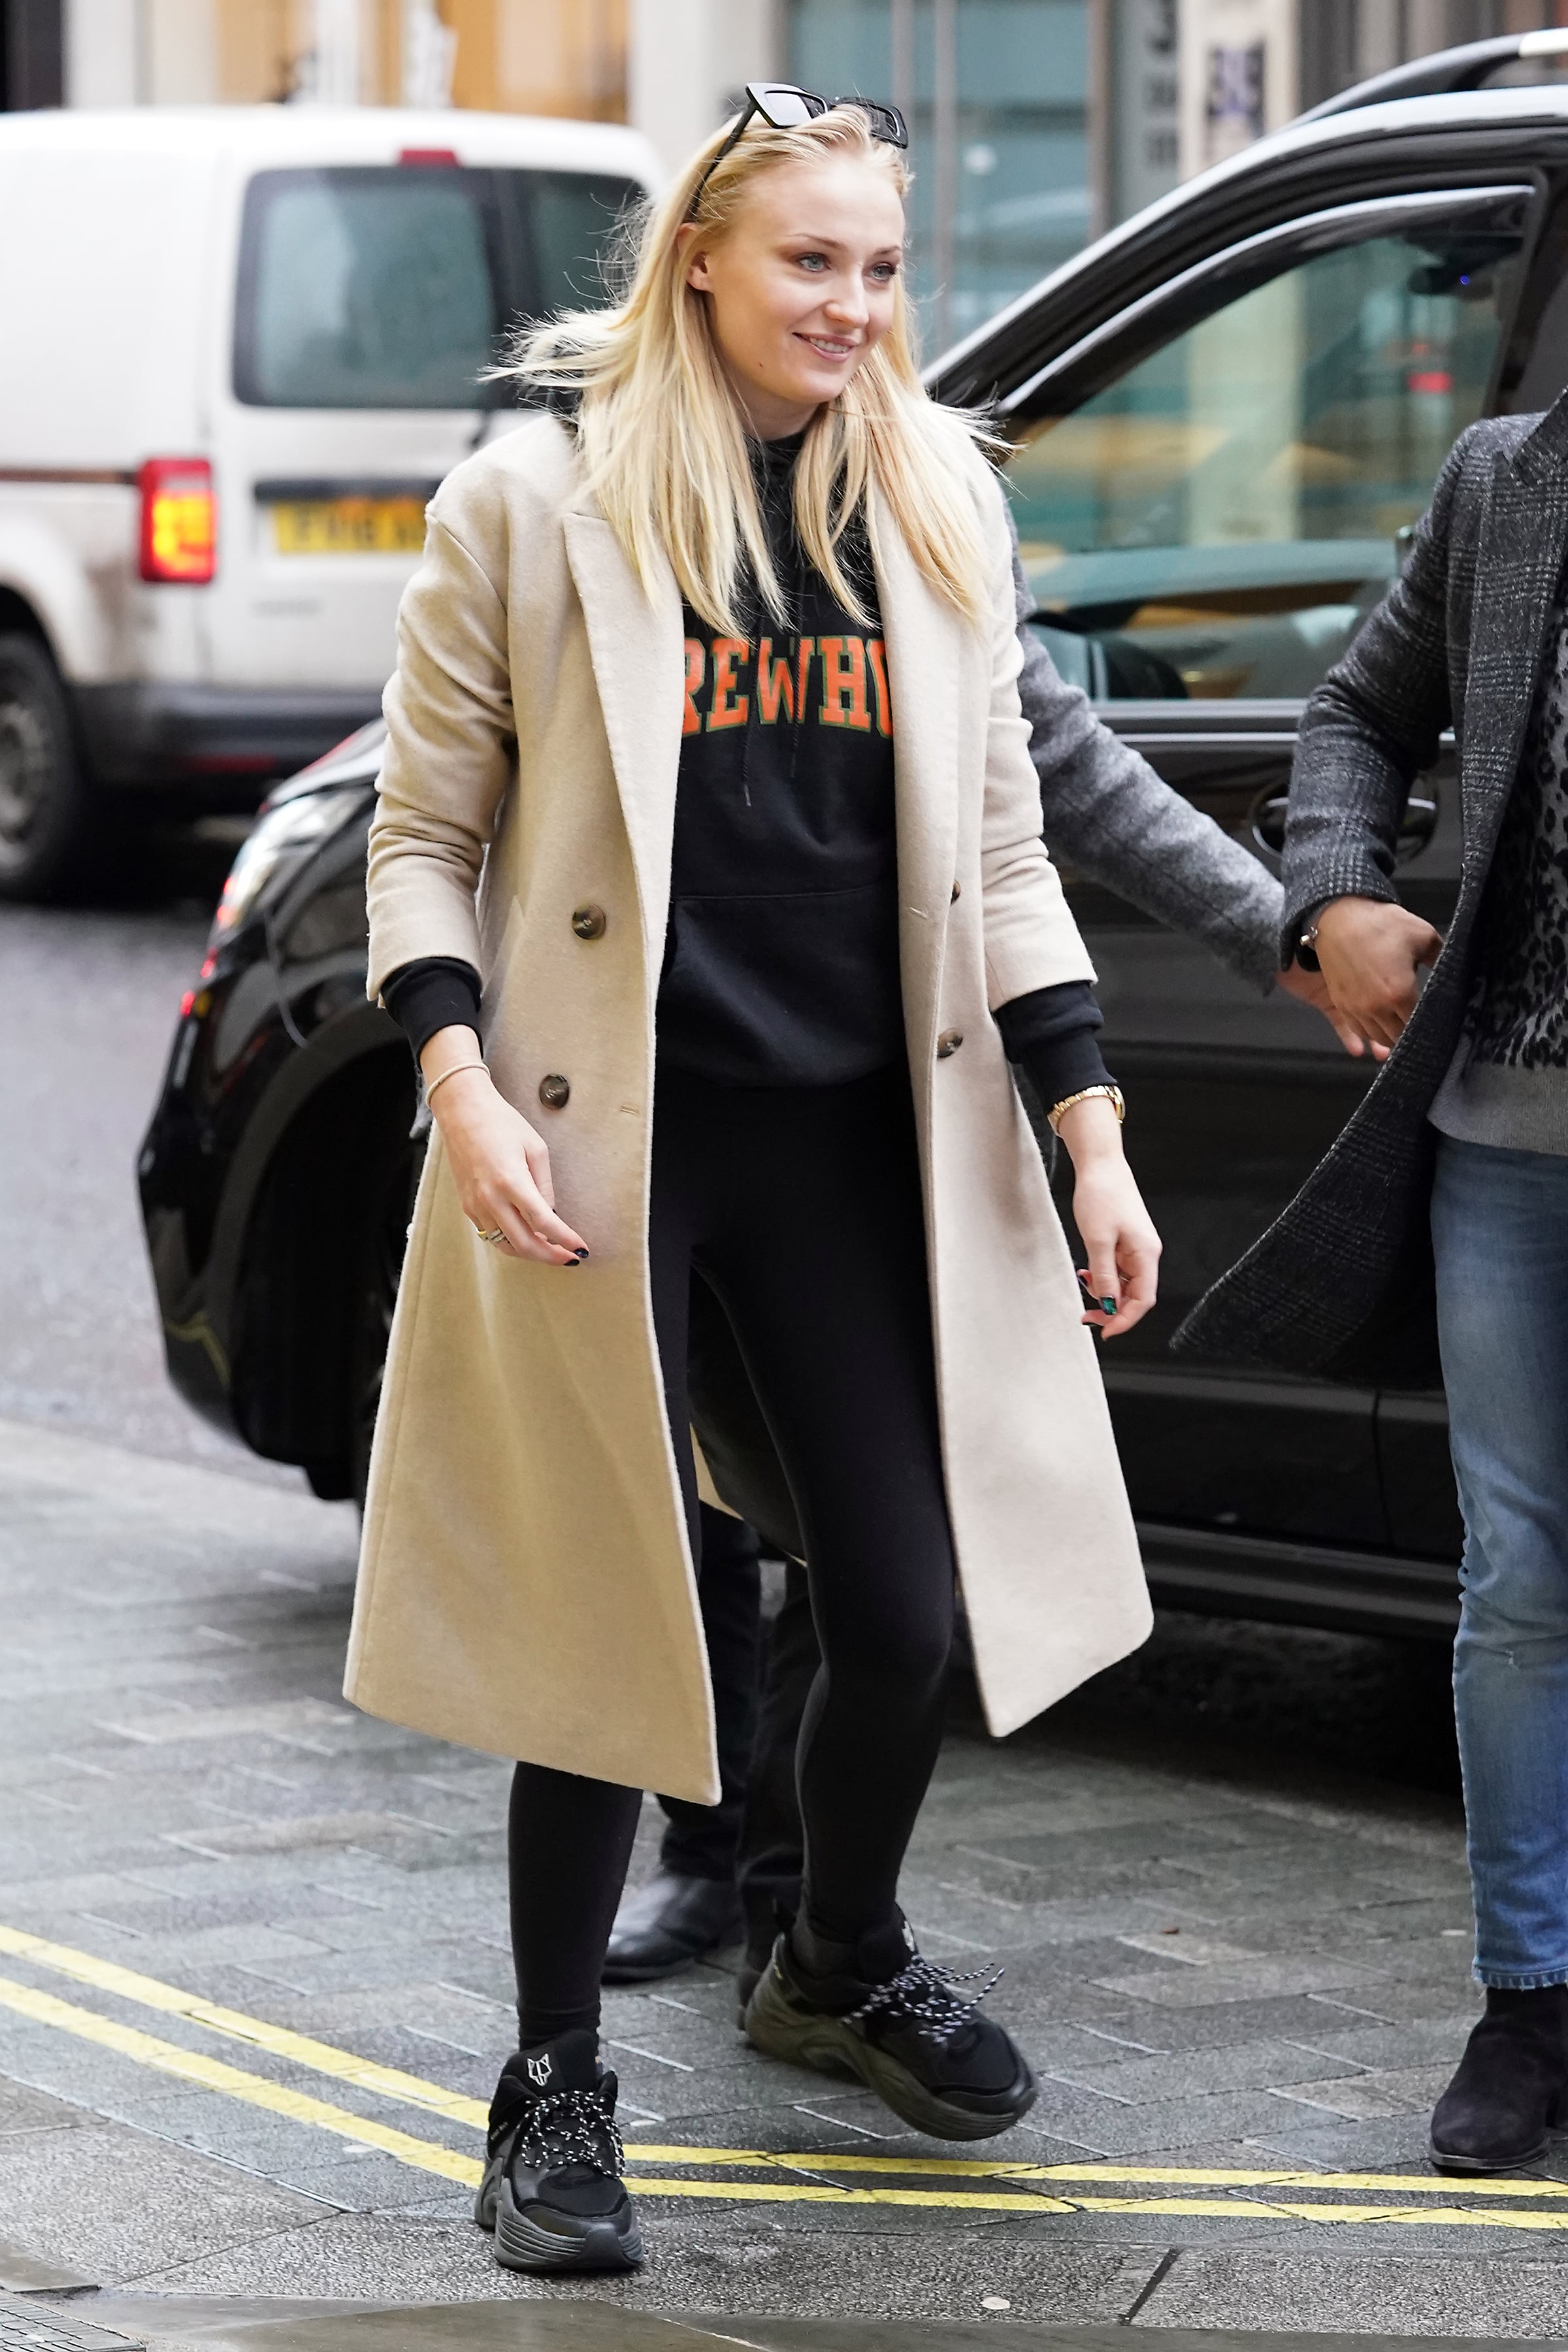 Sophie Turner's Style File: Her Best Street Style Moments To Date